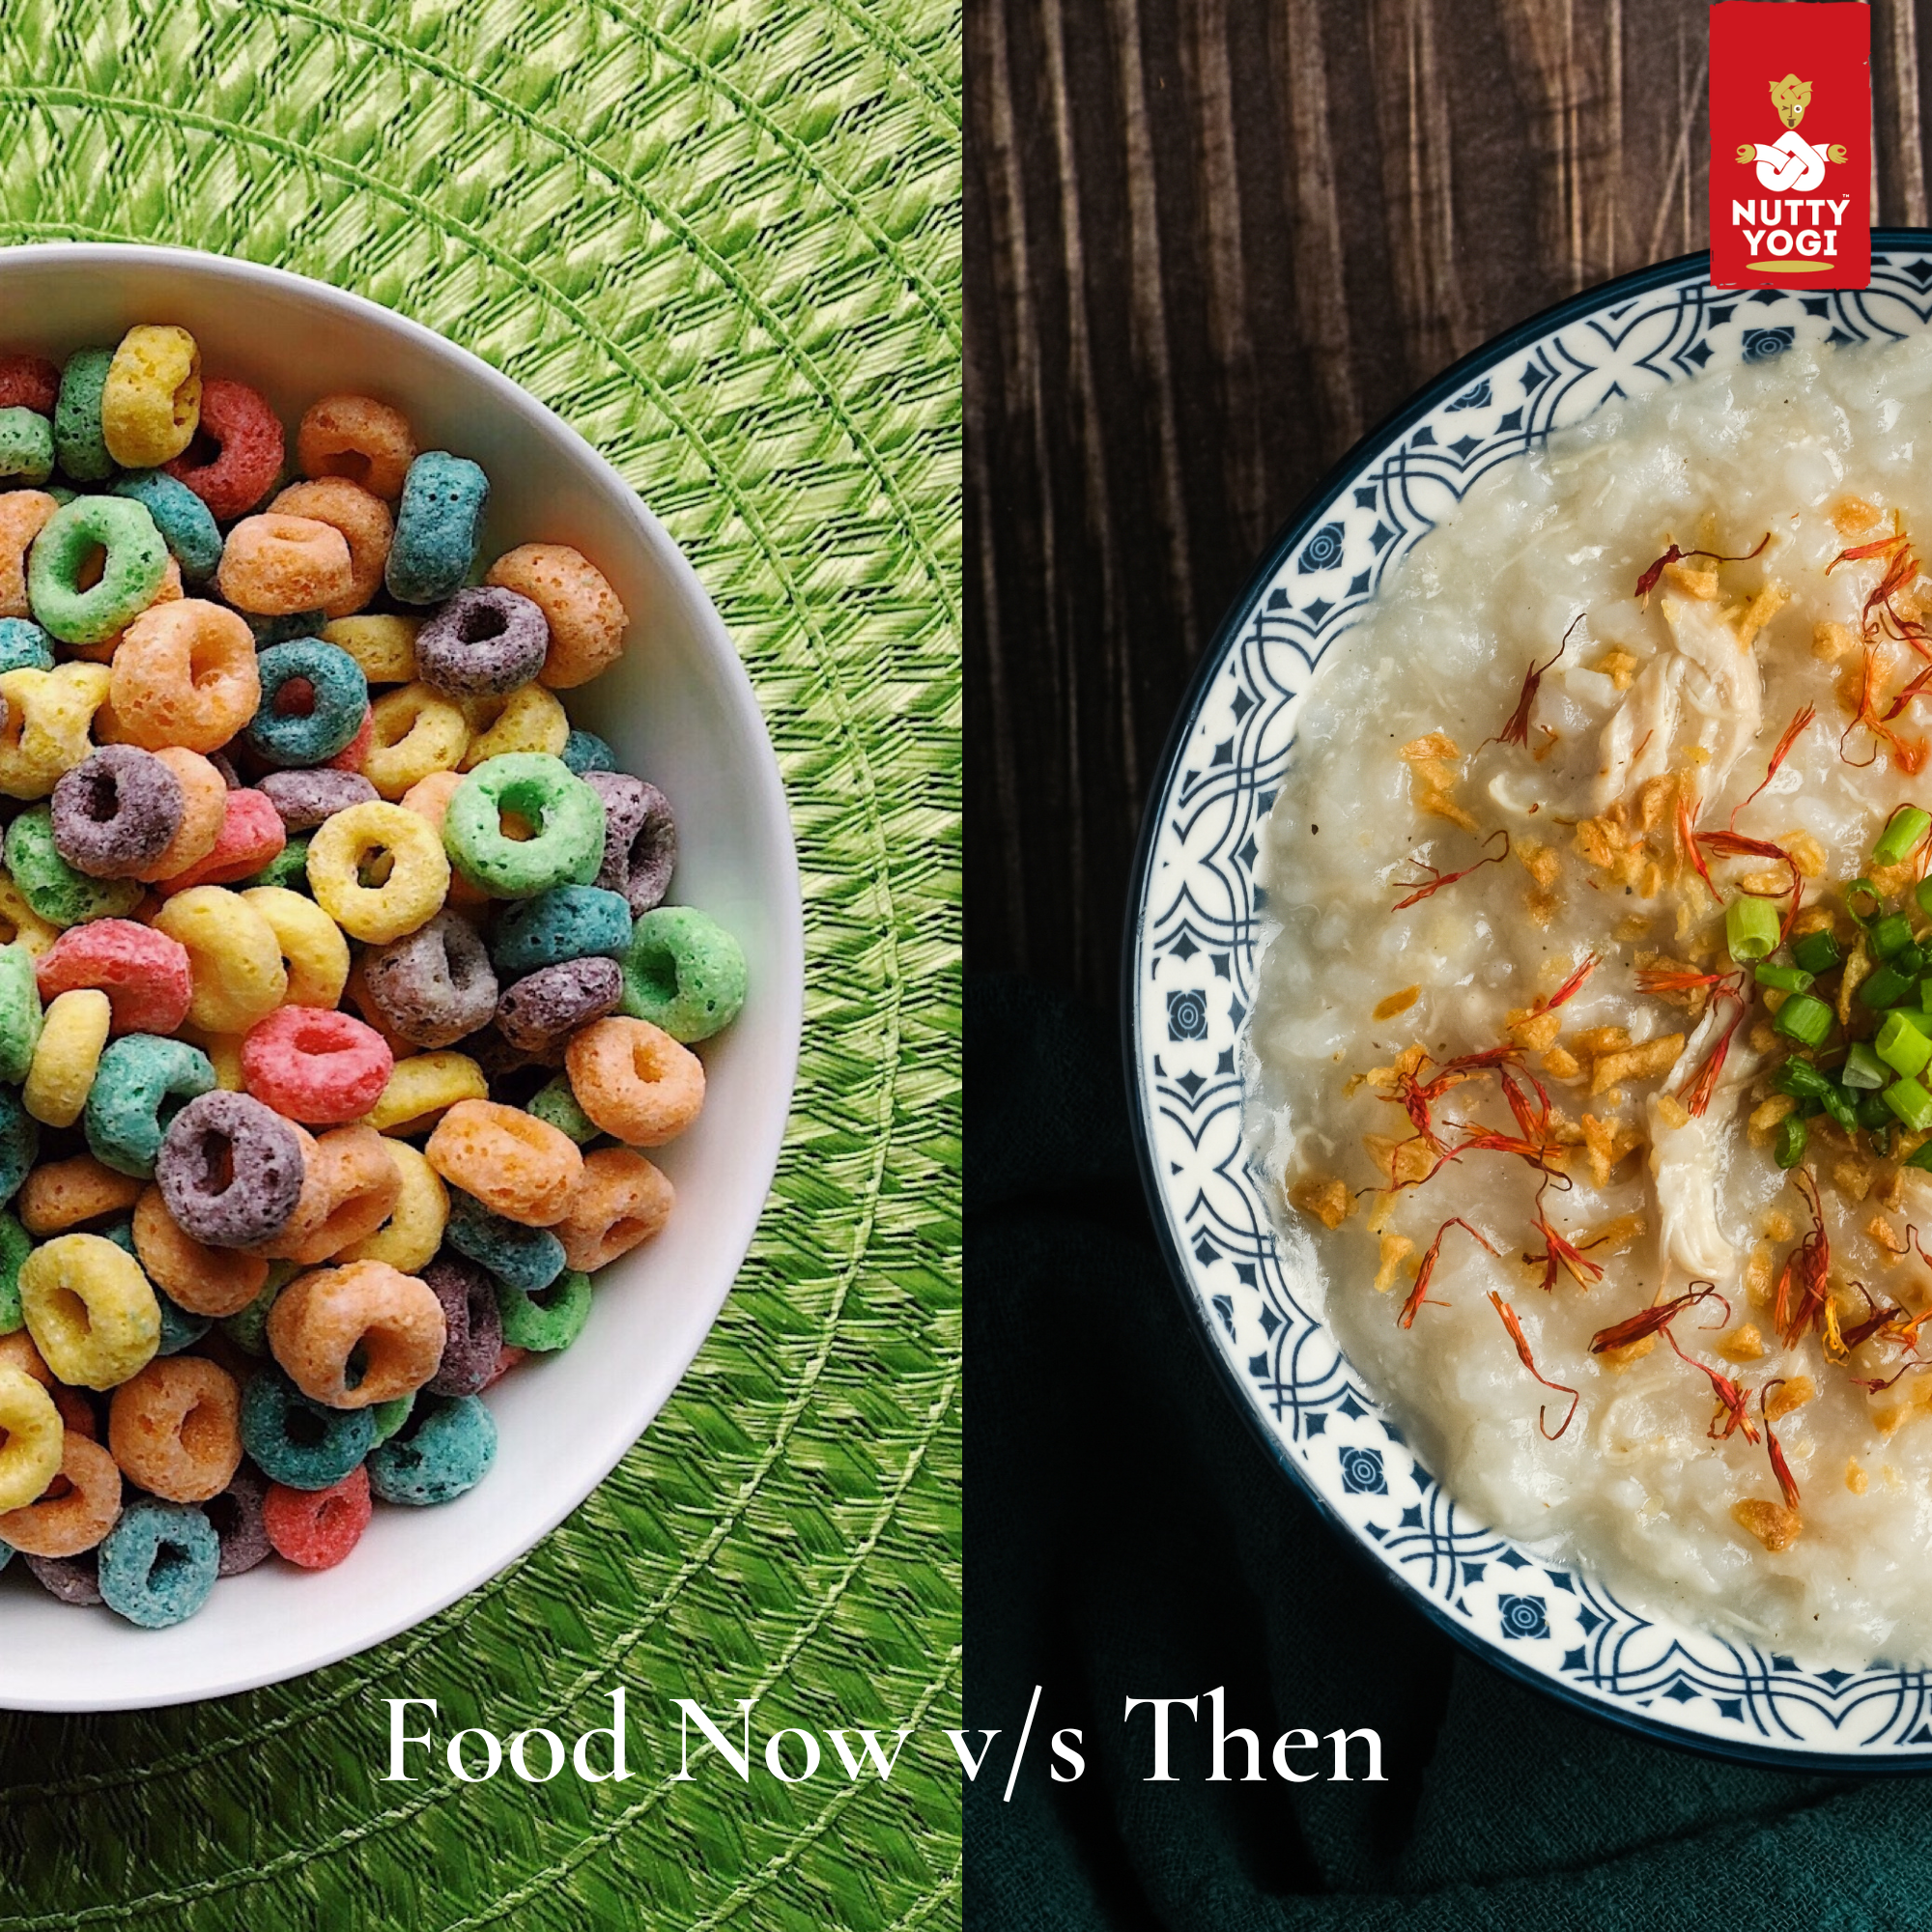 Food - Then and Now!